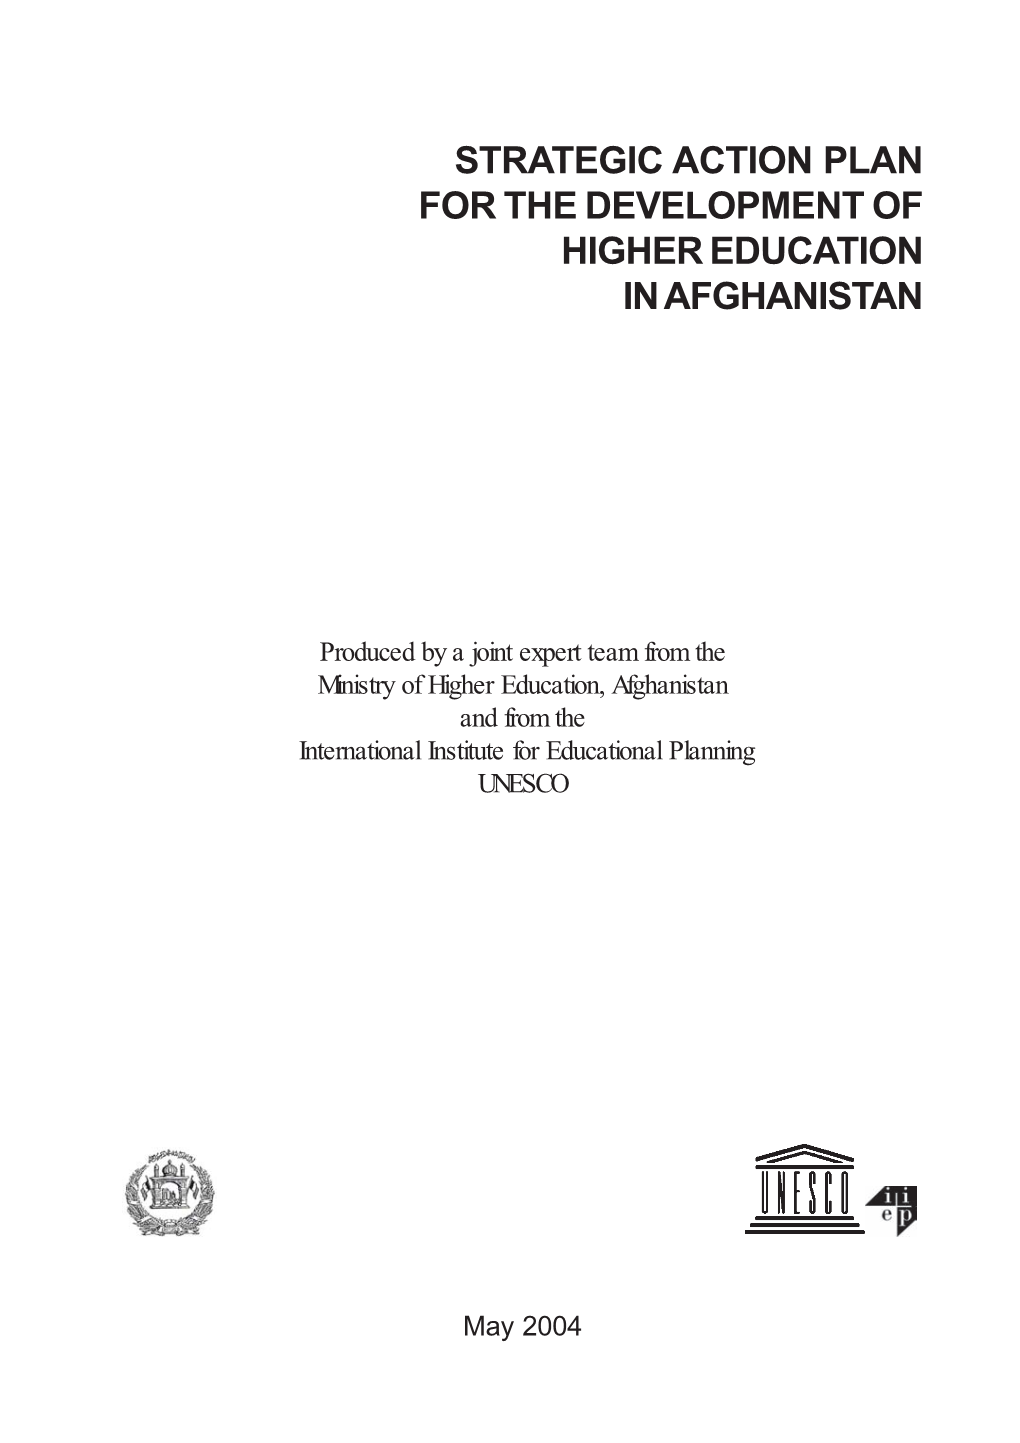 Strategic Action Plan for the Development of Higher Education in Afghanistan; 2004